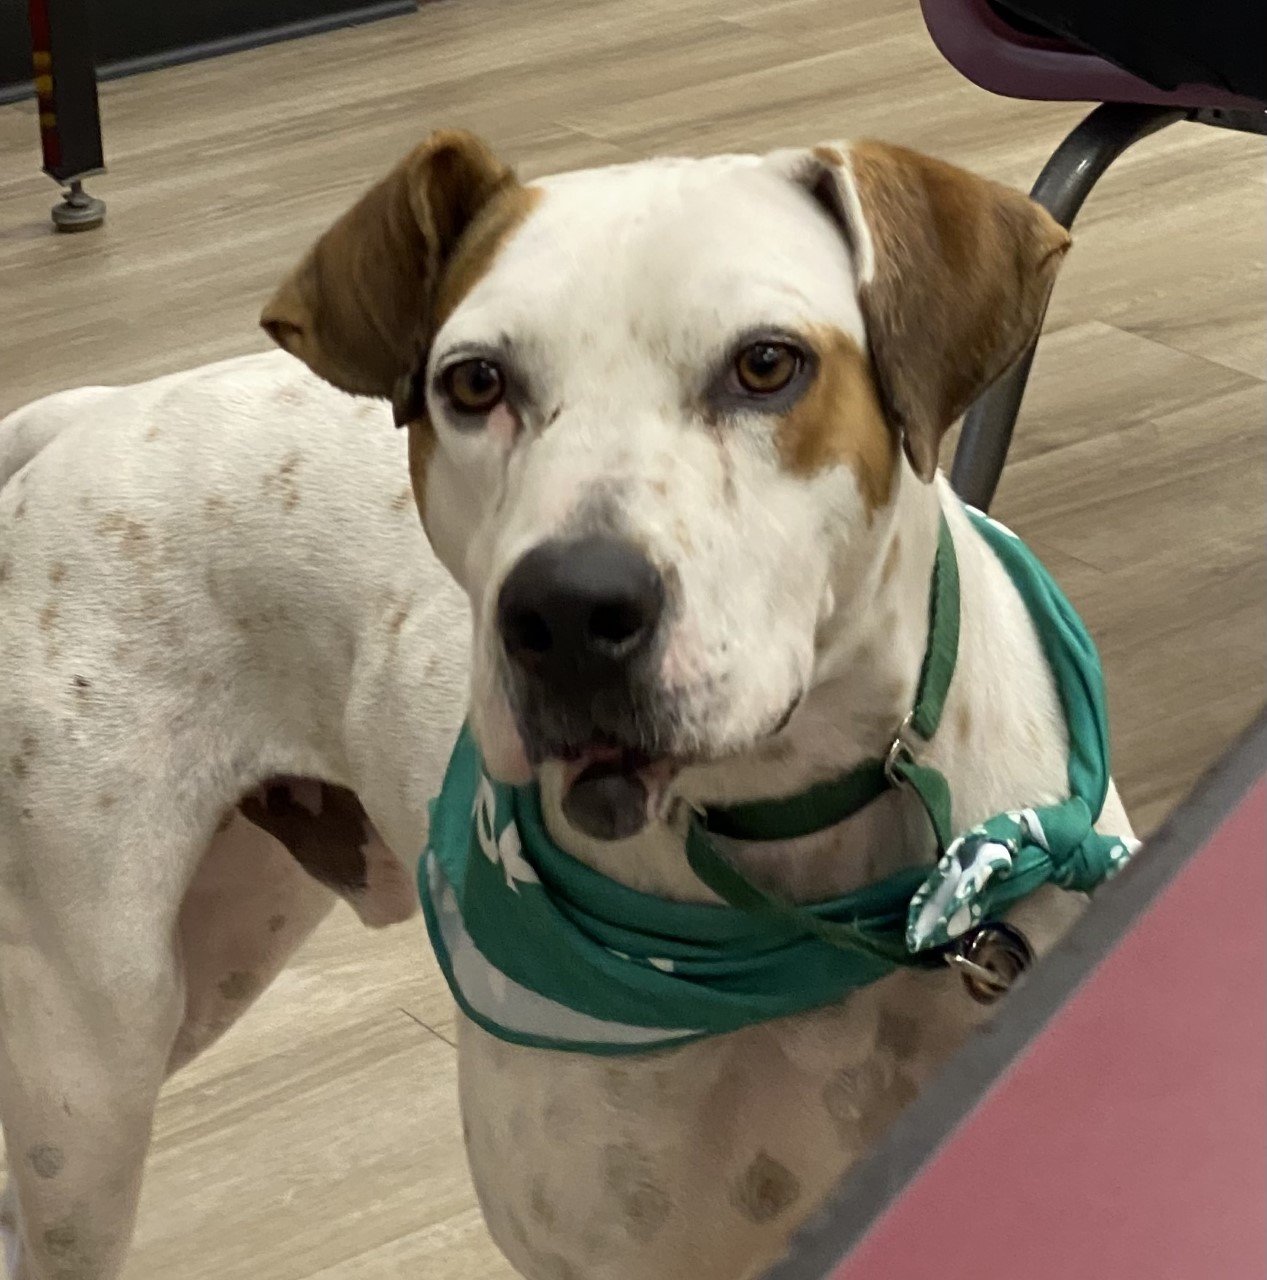 Flapjack came to Caloosa Humane Society with injuries and needed surgery right away. He has physical scars from his past life, but could not be any sweeter. Flapjack is great with kids and other dogs. Flapjack is 3 yrs. old. [Photo courtesy Caloosa Humane Society]